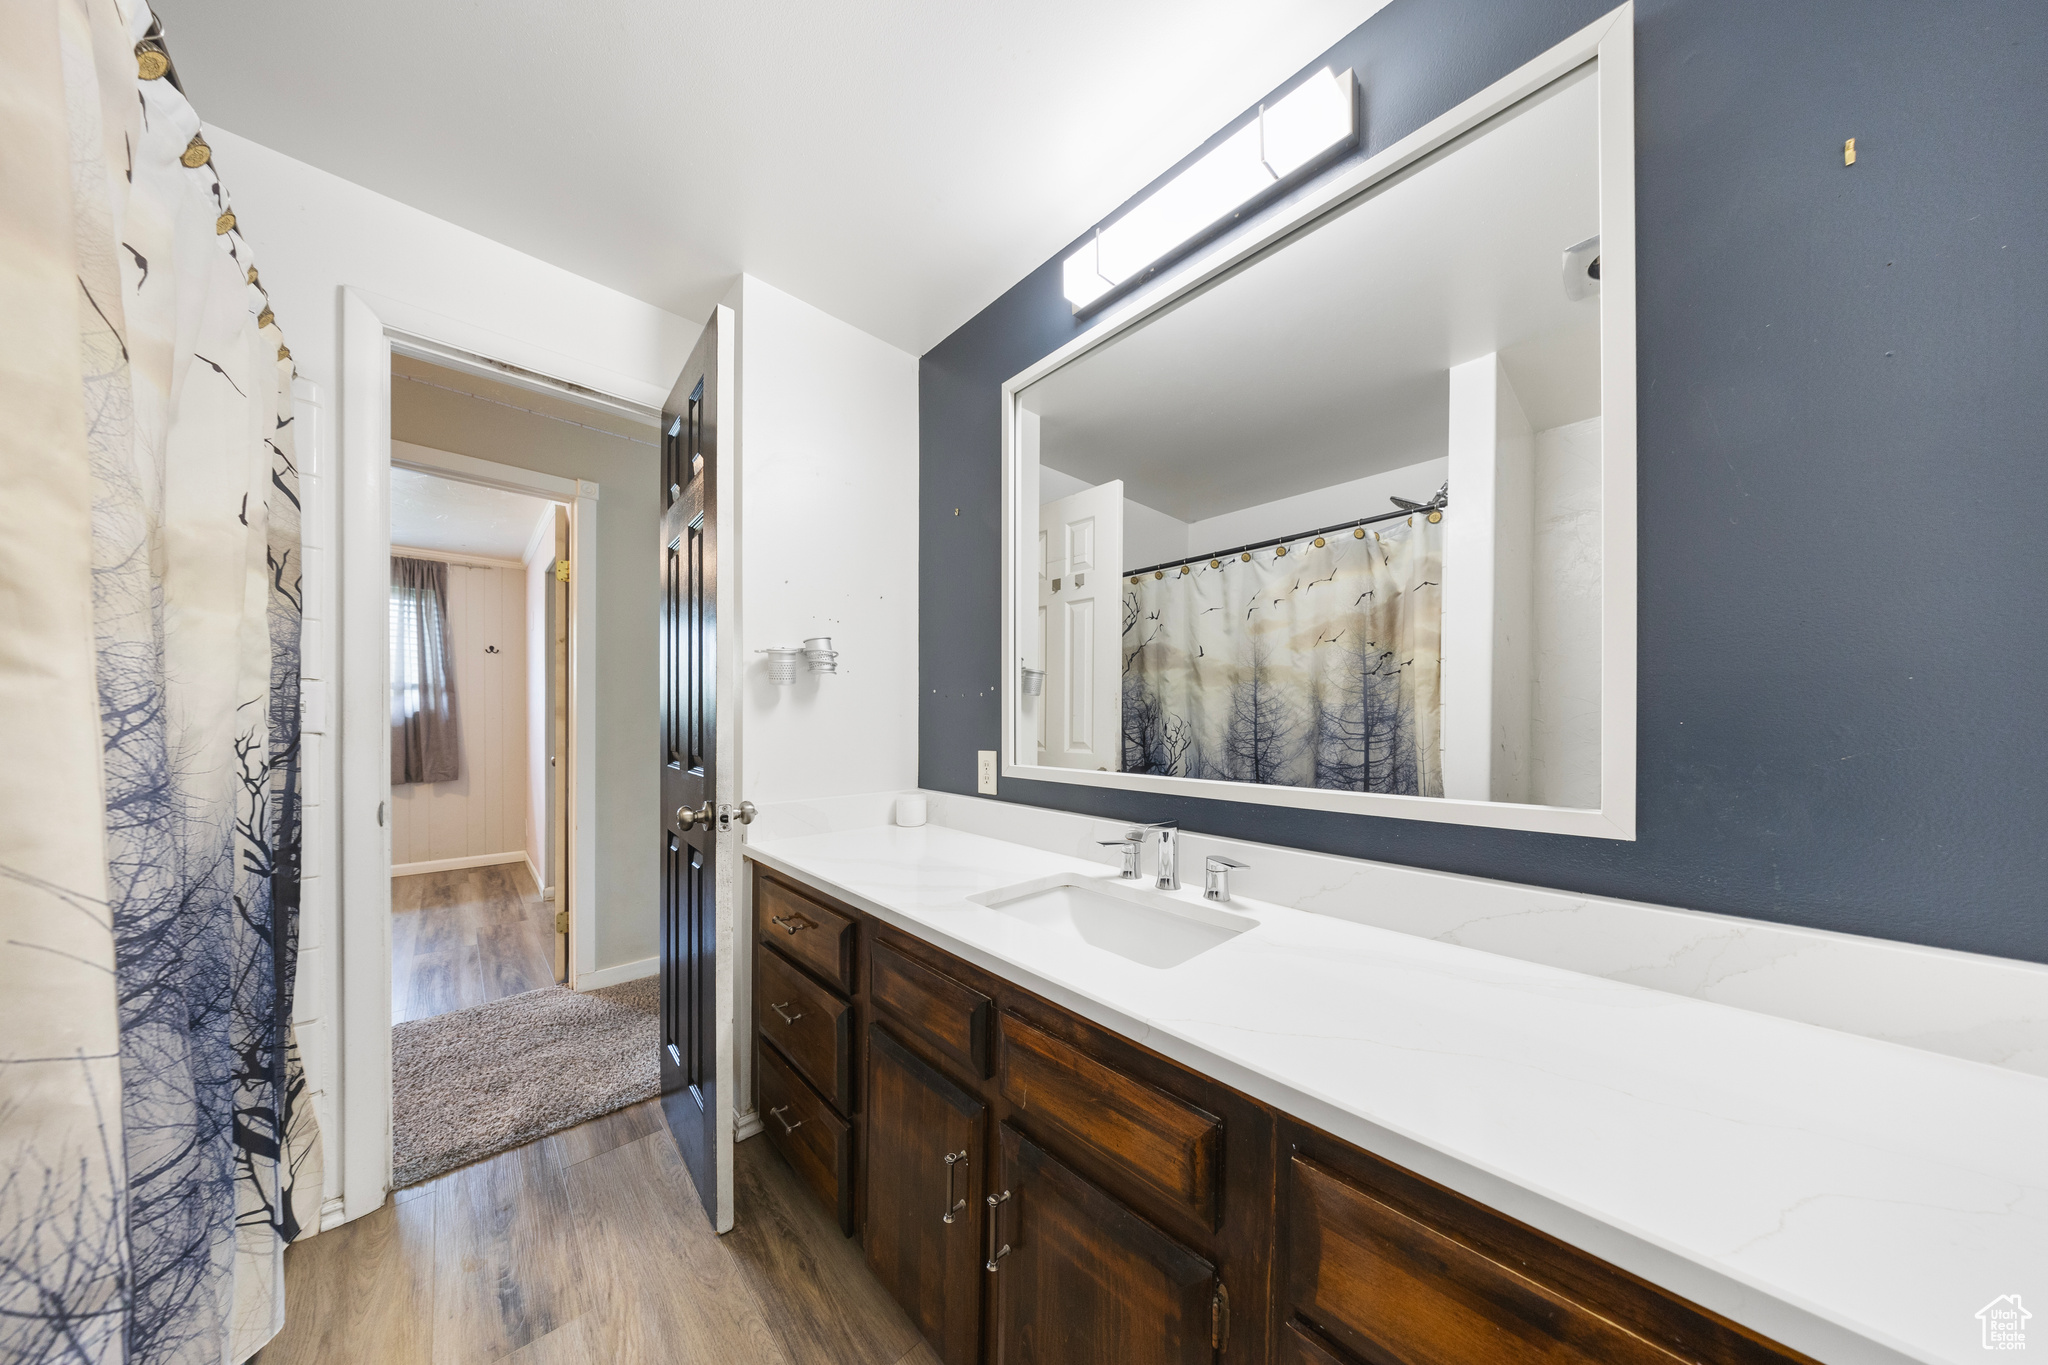 Bathroom with vanity with extensive cabinet space and hardwood / wood-style floors